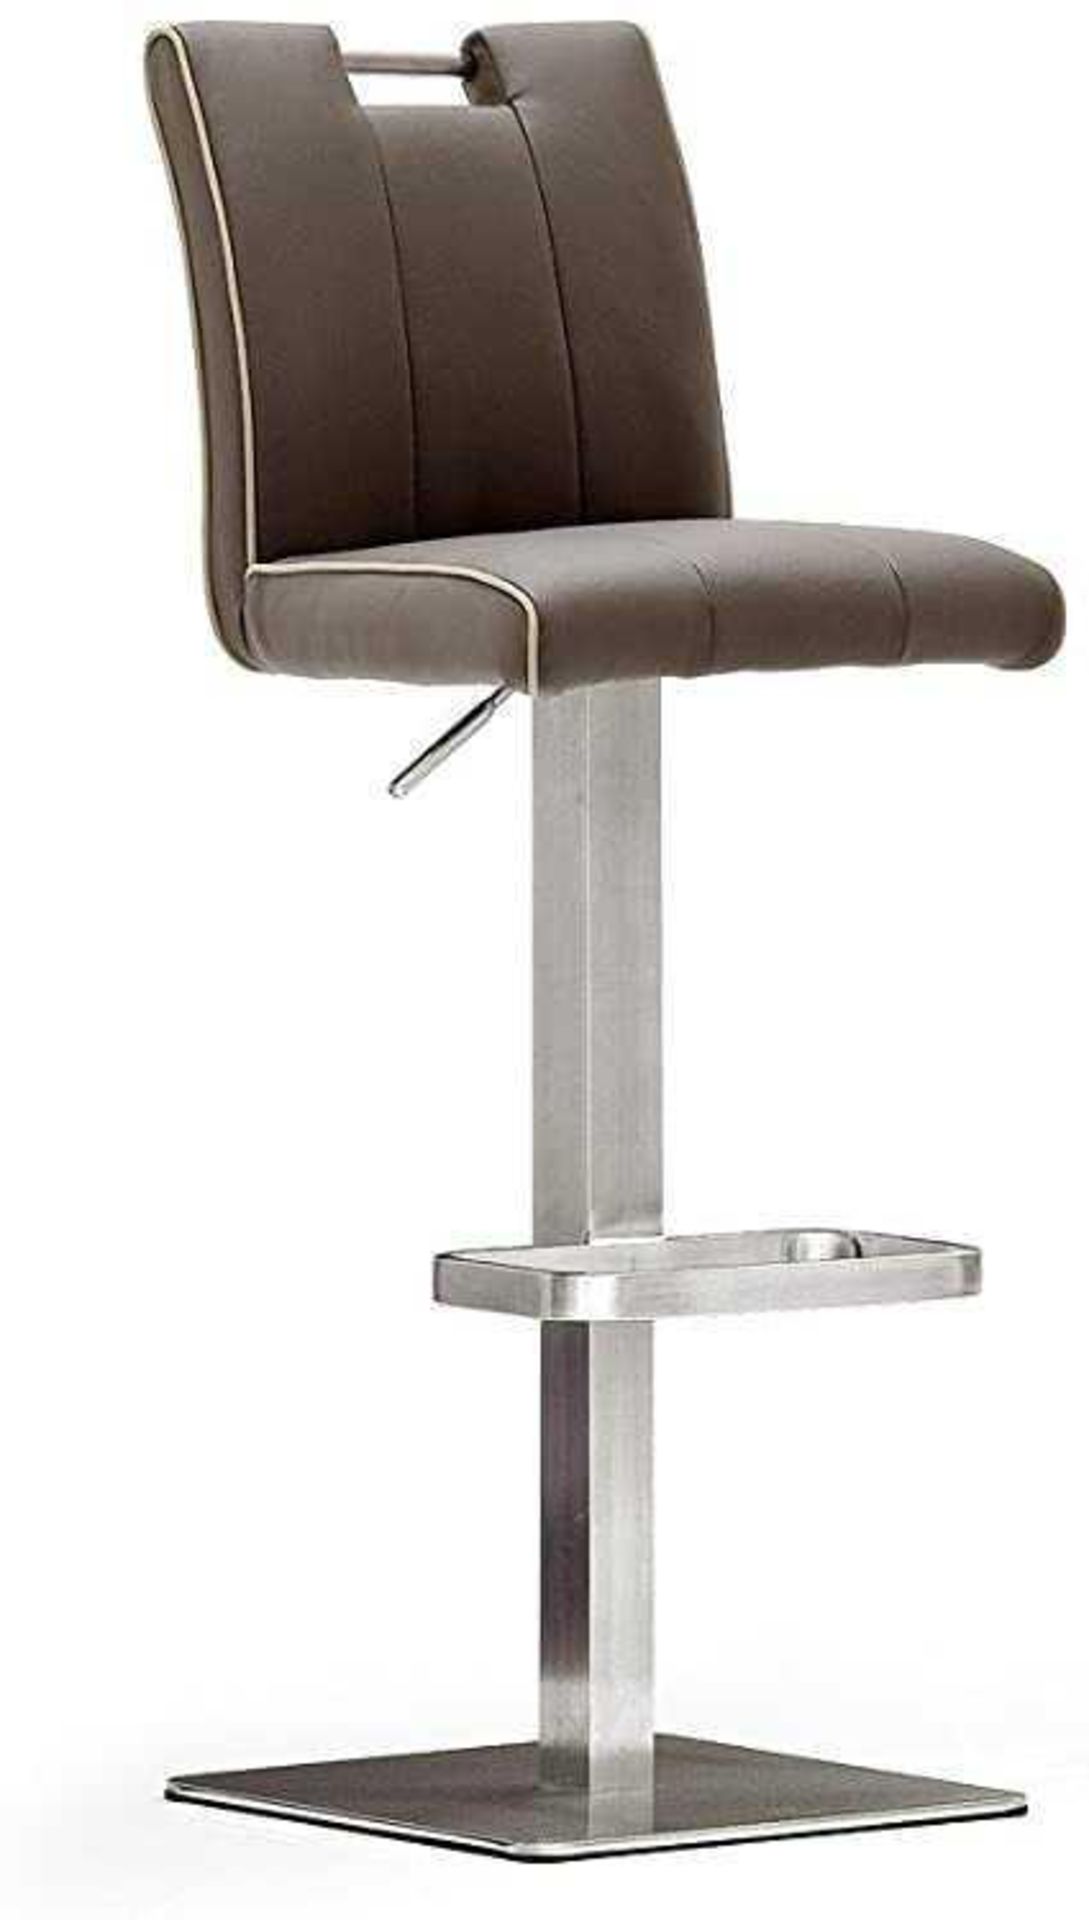 RRP £100 - Boxed 'Casta'Barstool In Black Faux Leather With Chrome Base